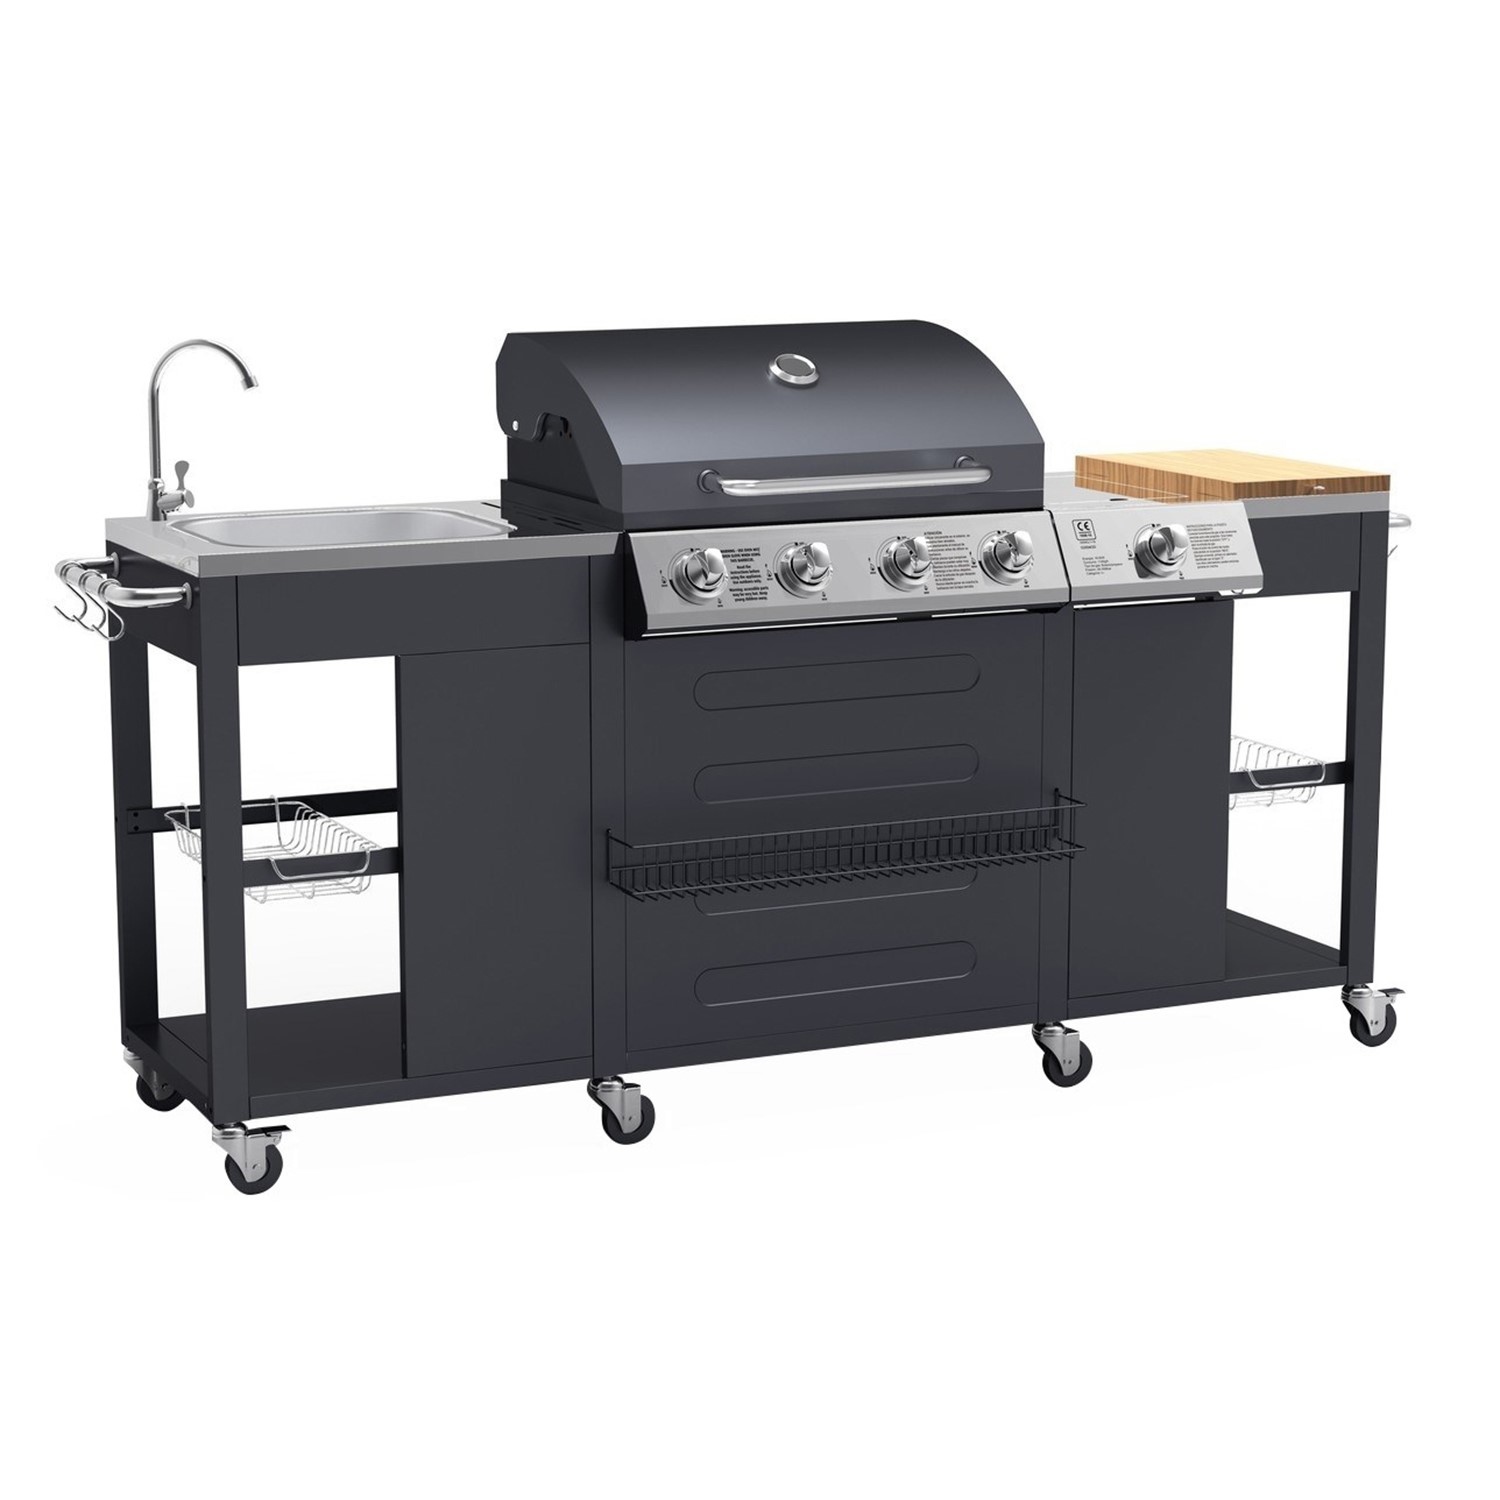 The Texas Outdoor 4 Burner BBQ Kitchen Includes BBQ Cover & Utensils